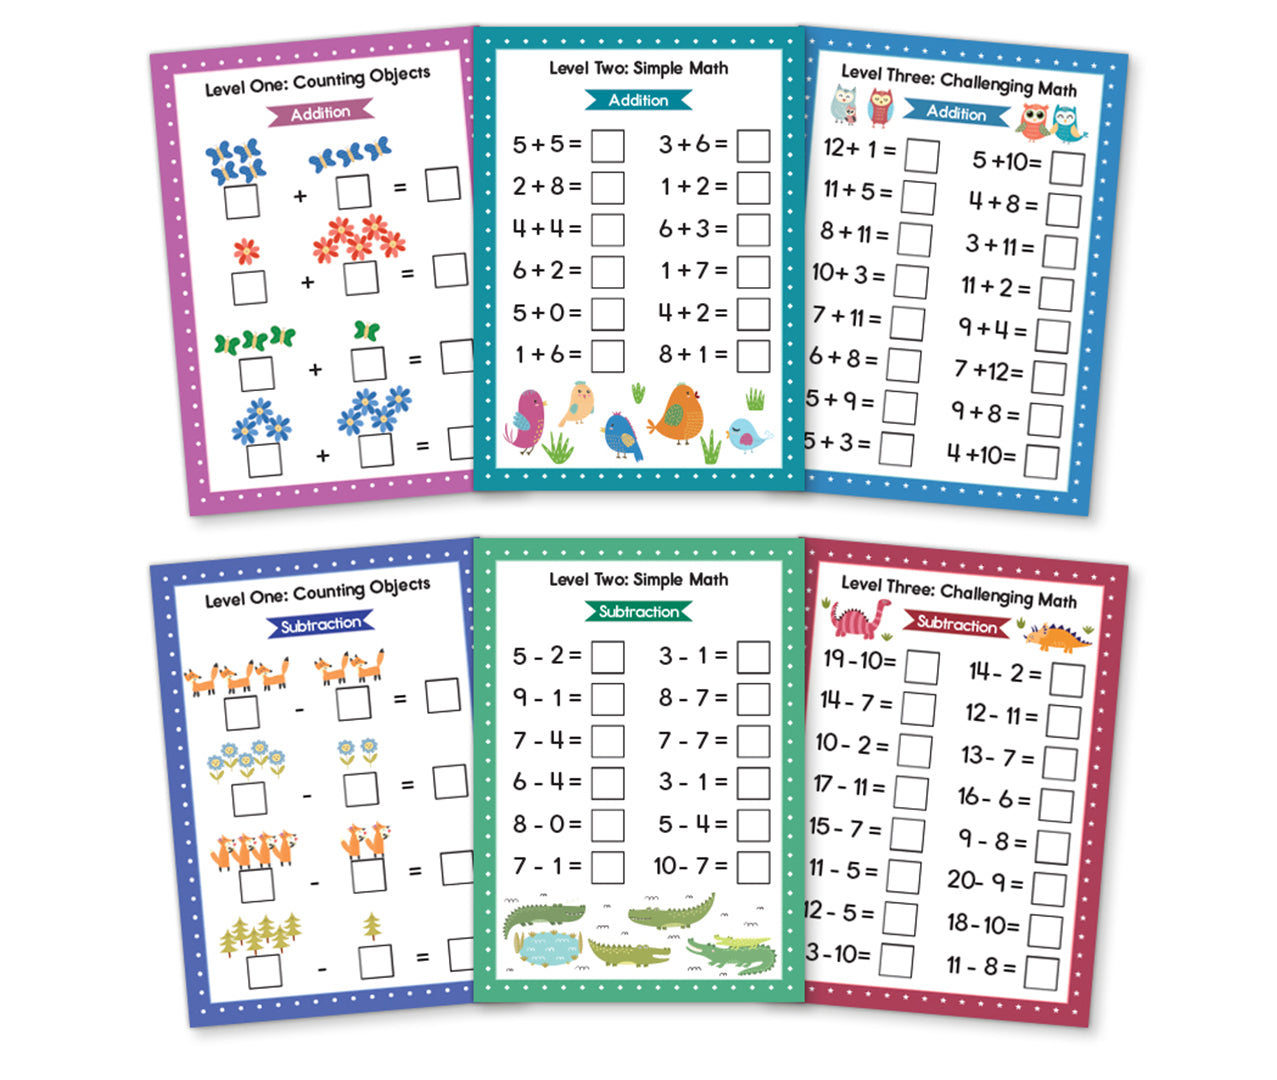 Reusable Dry Erase Addition & Subtraction Cards - Math Learning Made Easy!